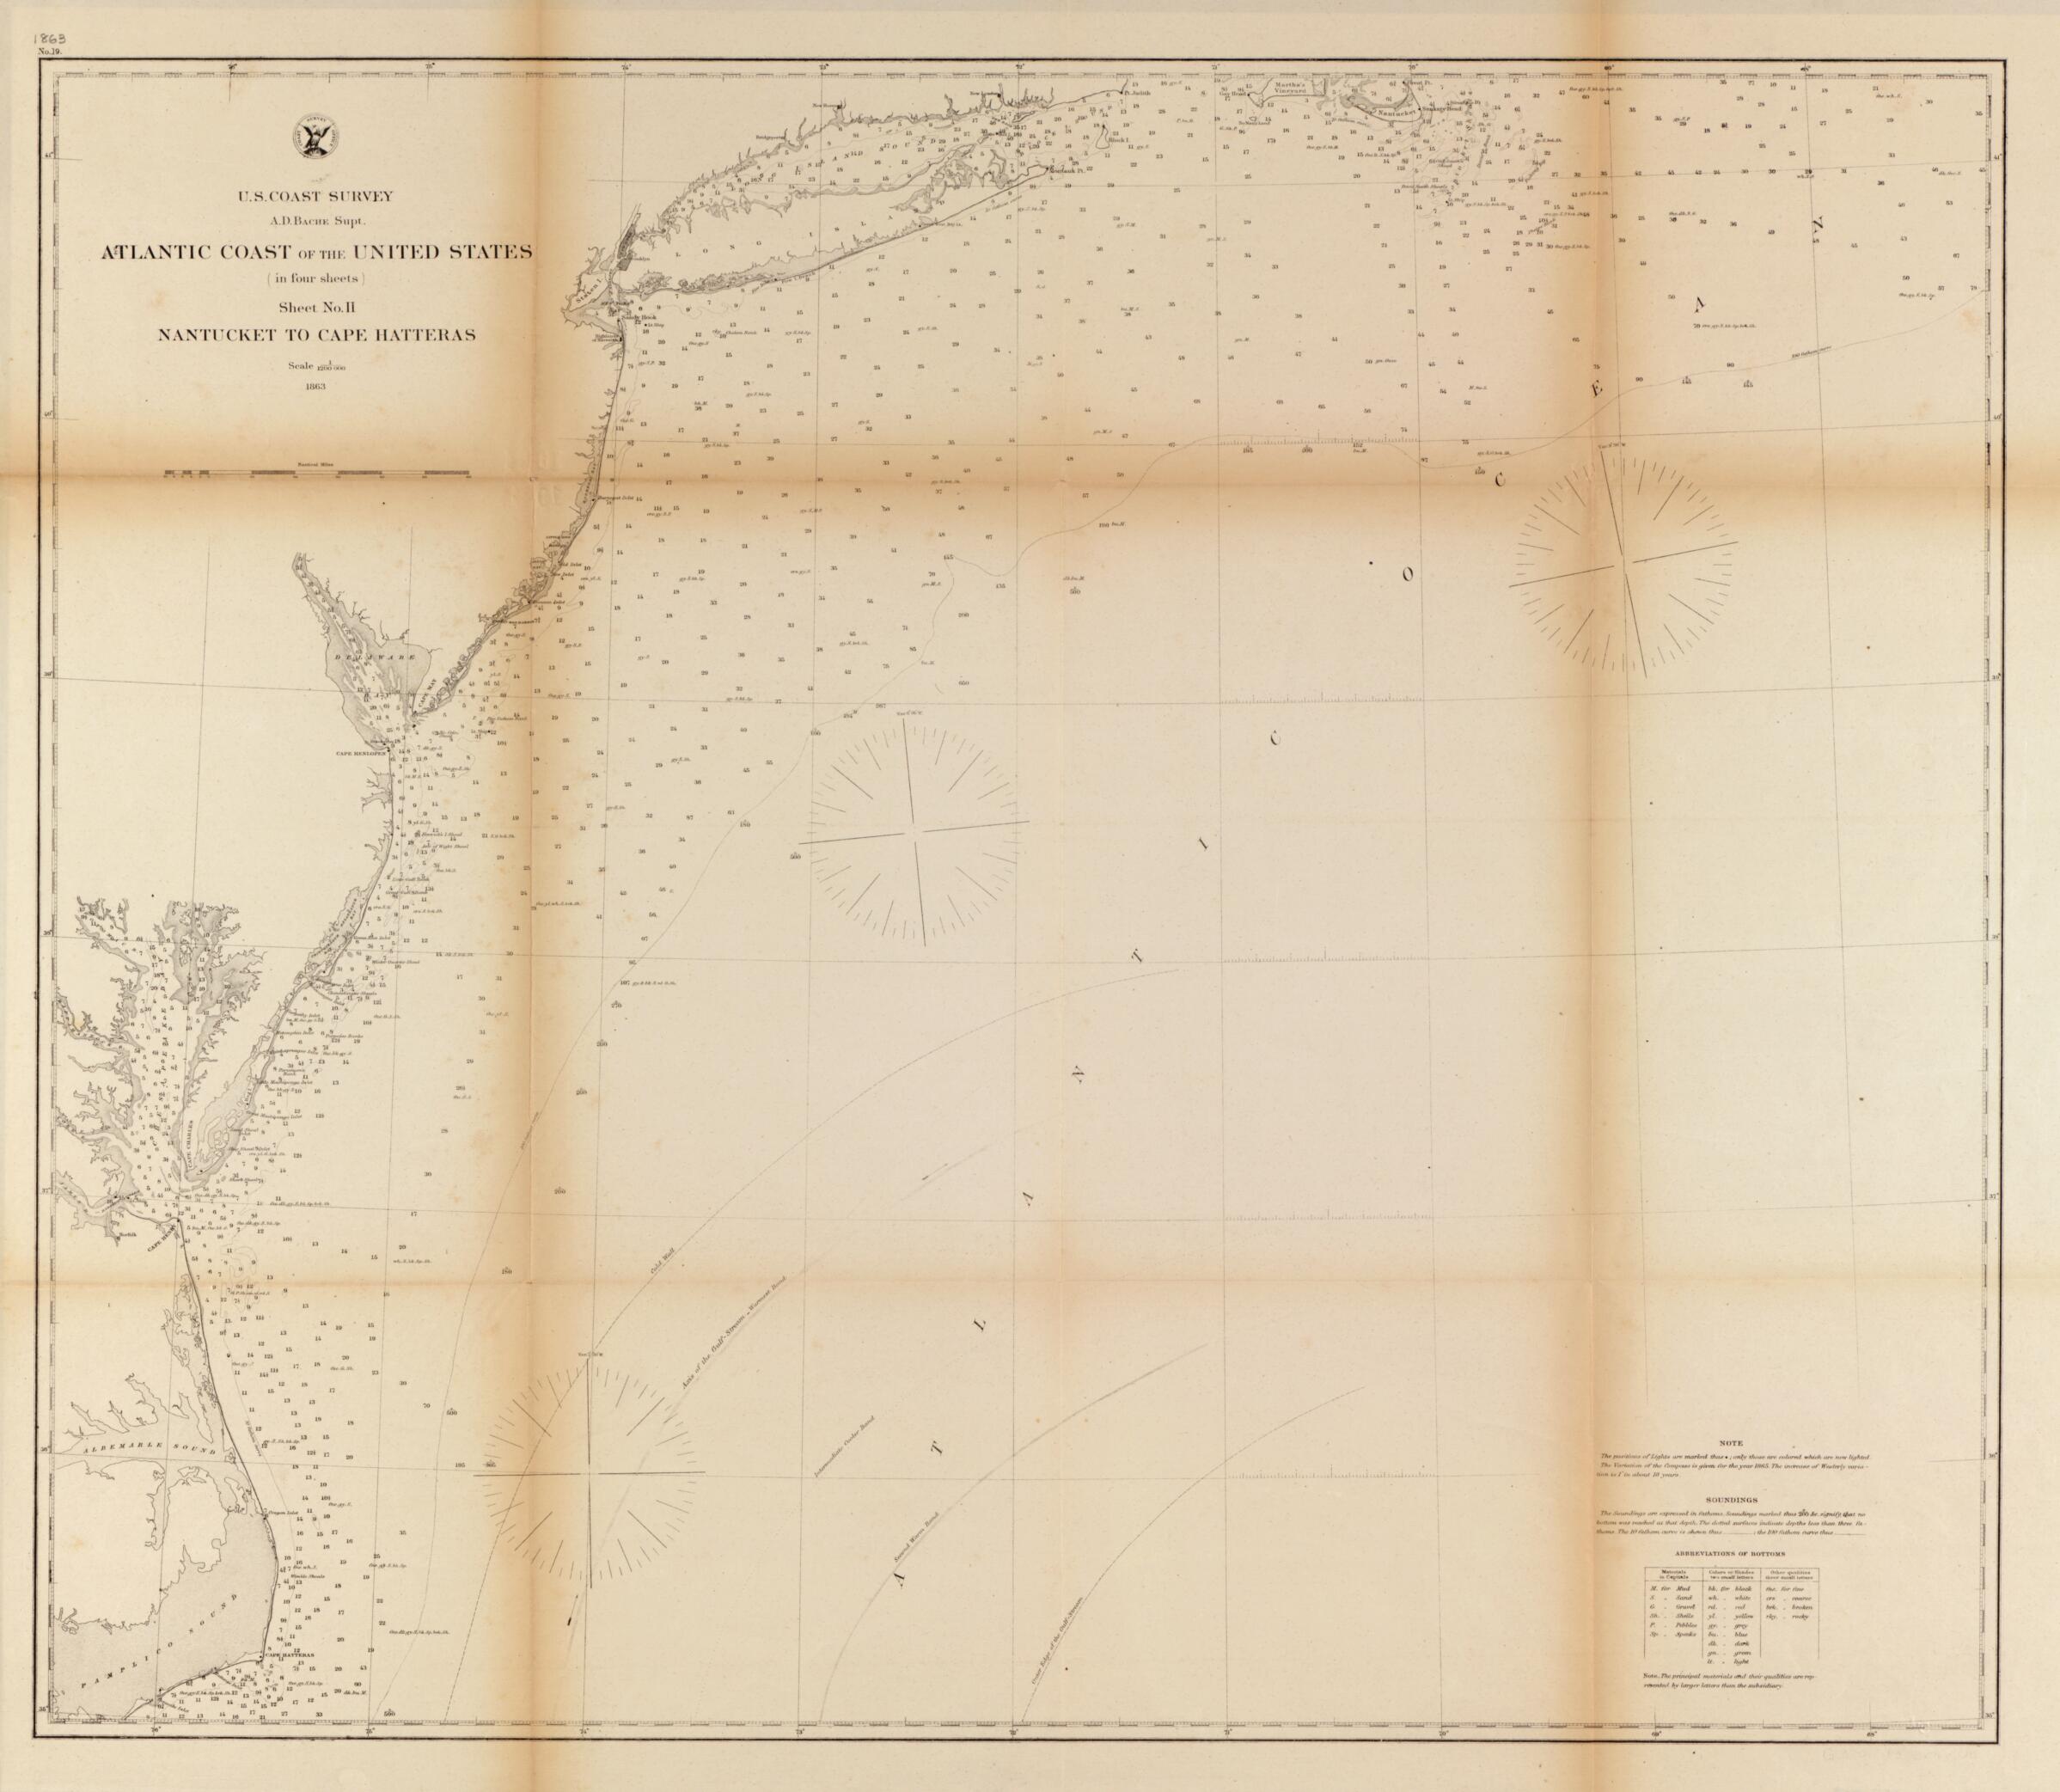 This old map of Atlantic Coast of the United States (in Four Sheets) : Sheet No. II, Nantucket to Cape Hatteras from 1863 was created by A. D. (Alexander Dallas) Bache,  United States Coast Survey in 1863